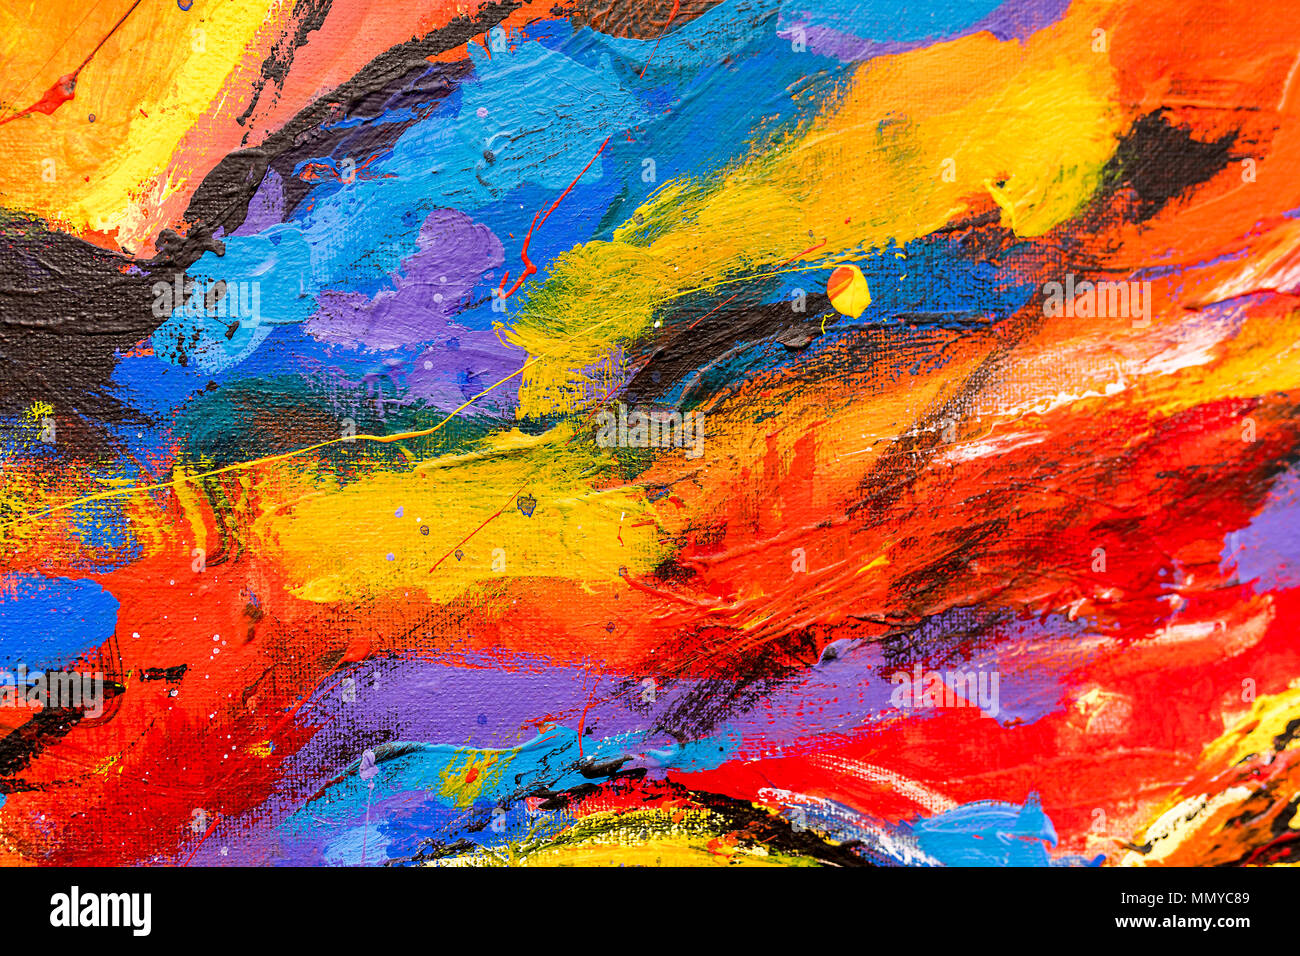 A vibrant and colourful oil and acrylic abstract painting background on canvas painted with wild and free brush strokes Stock Photo